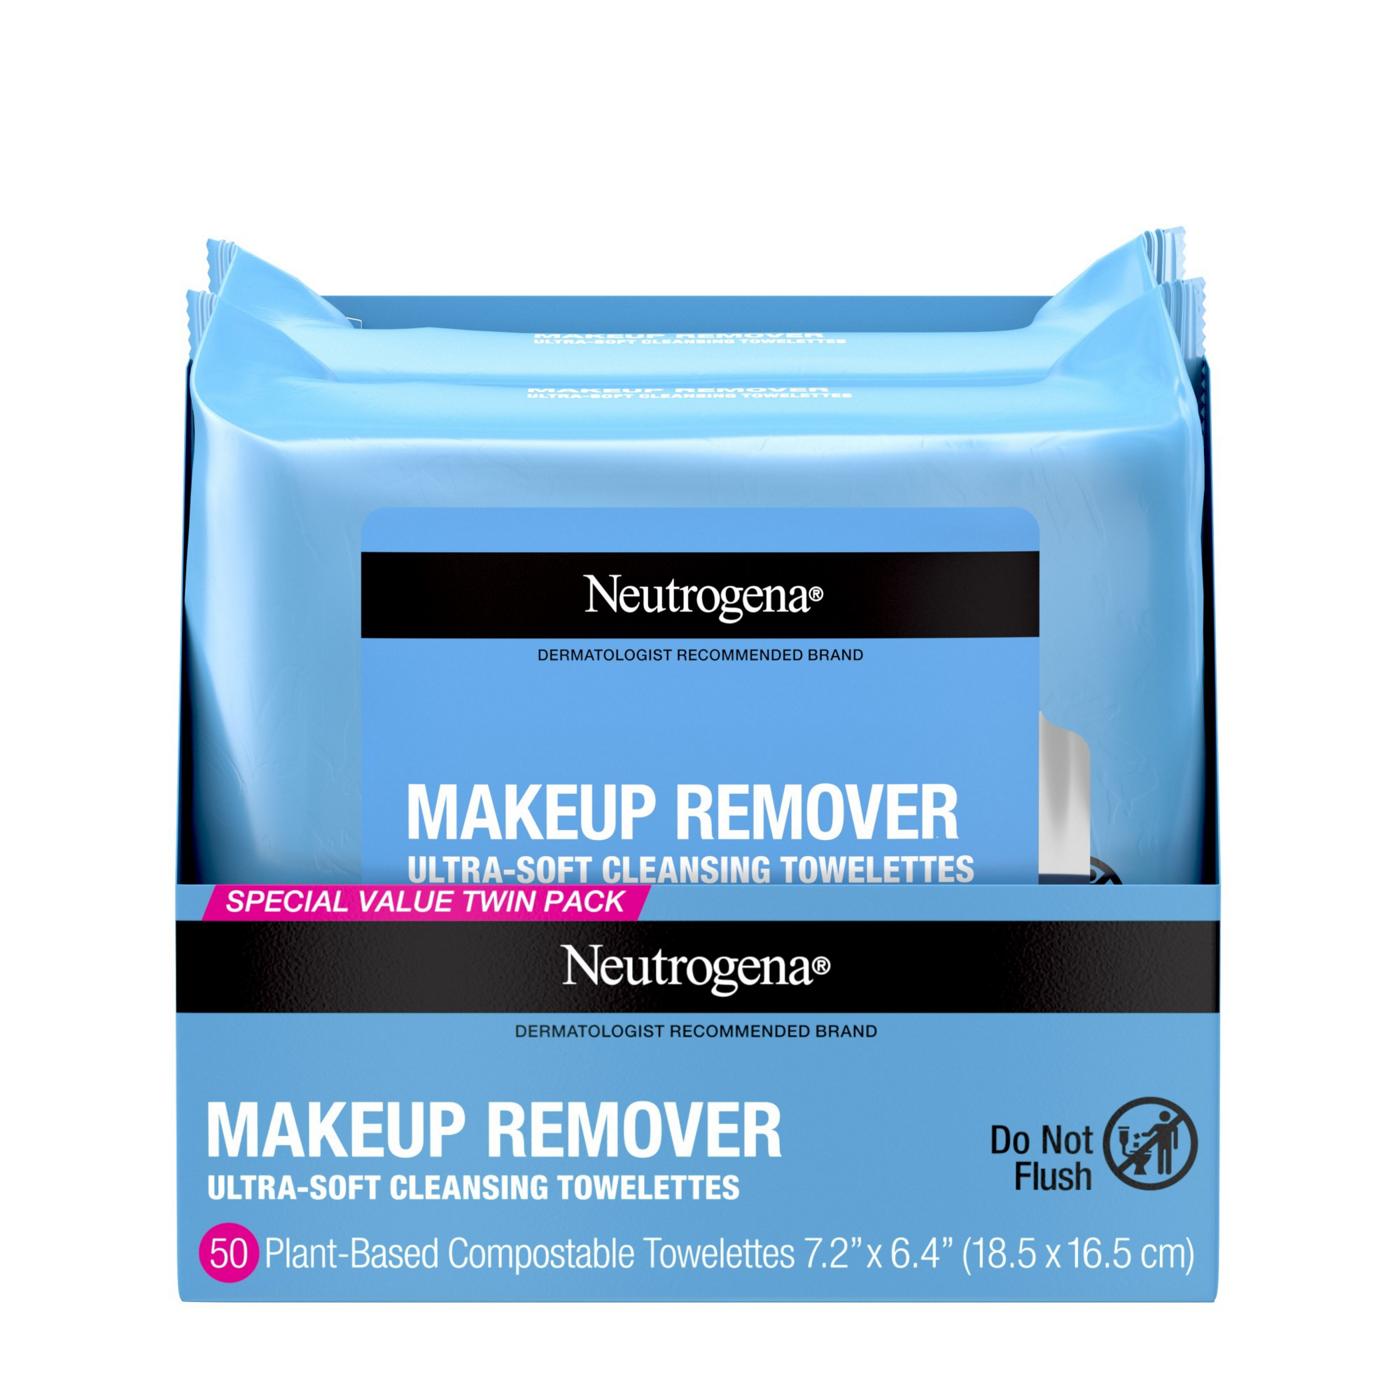 Neutrogena Makeup Remover Cleansing Towelettes - Twin Pack; image 1 of 9